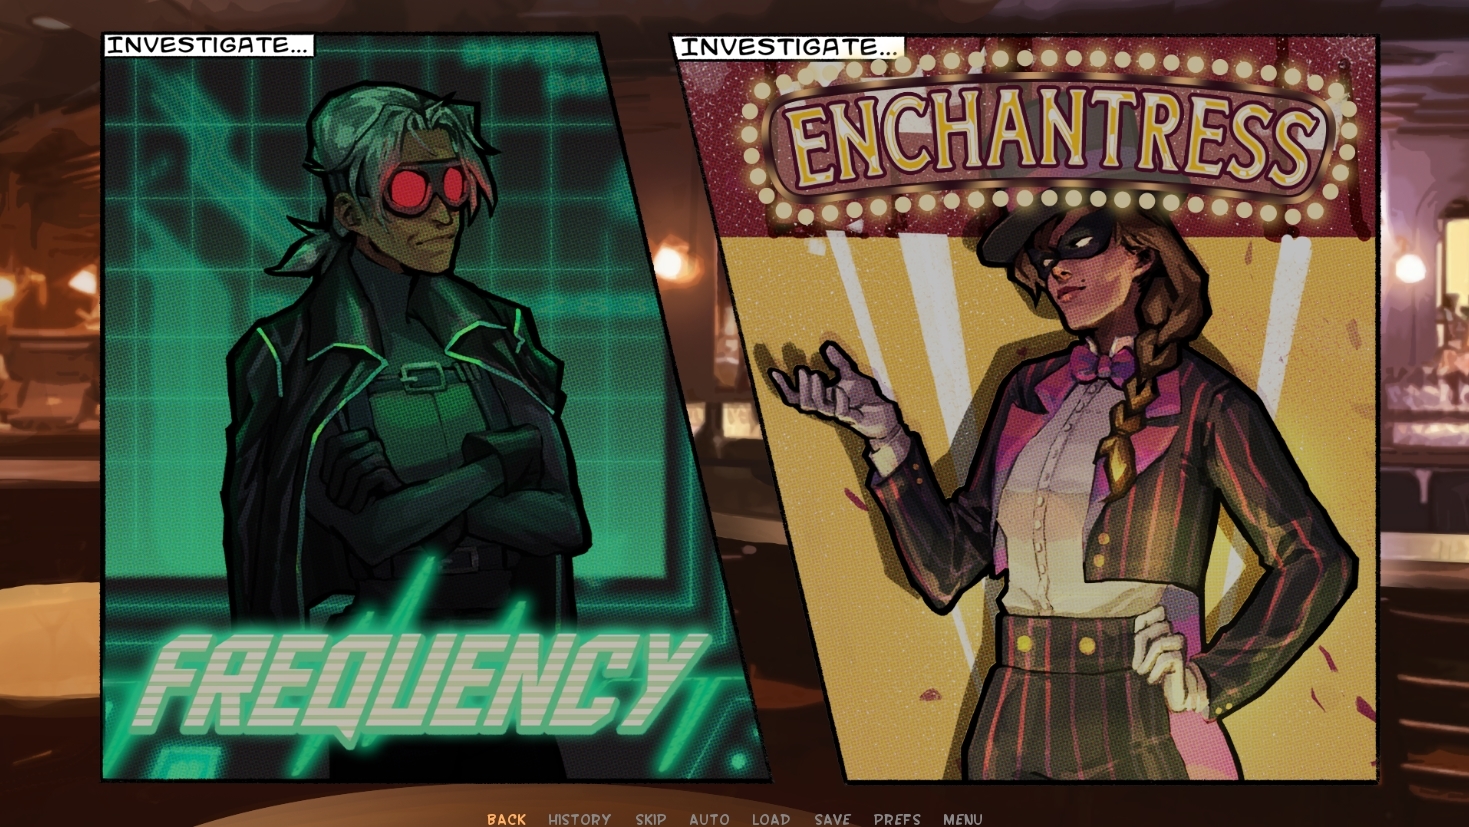 Two panels side by side show two feminine figures. Both say 'investigate' at the top. The figure on the left has grey hair and is called 'Frequency'. The figure on the right has brown hair and is dressed as a magician. She is called 'Enchantress'.